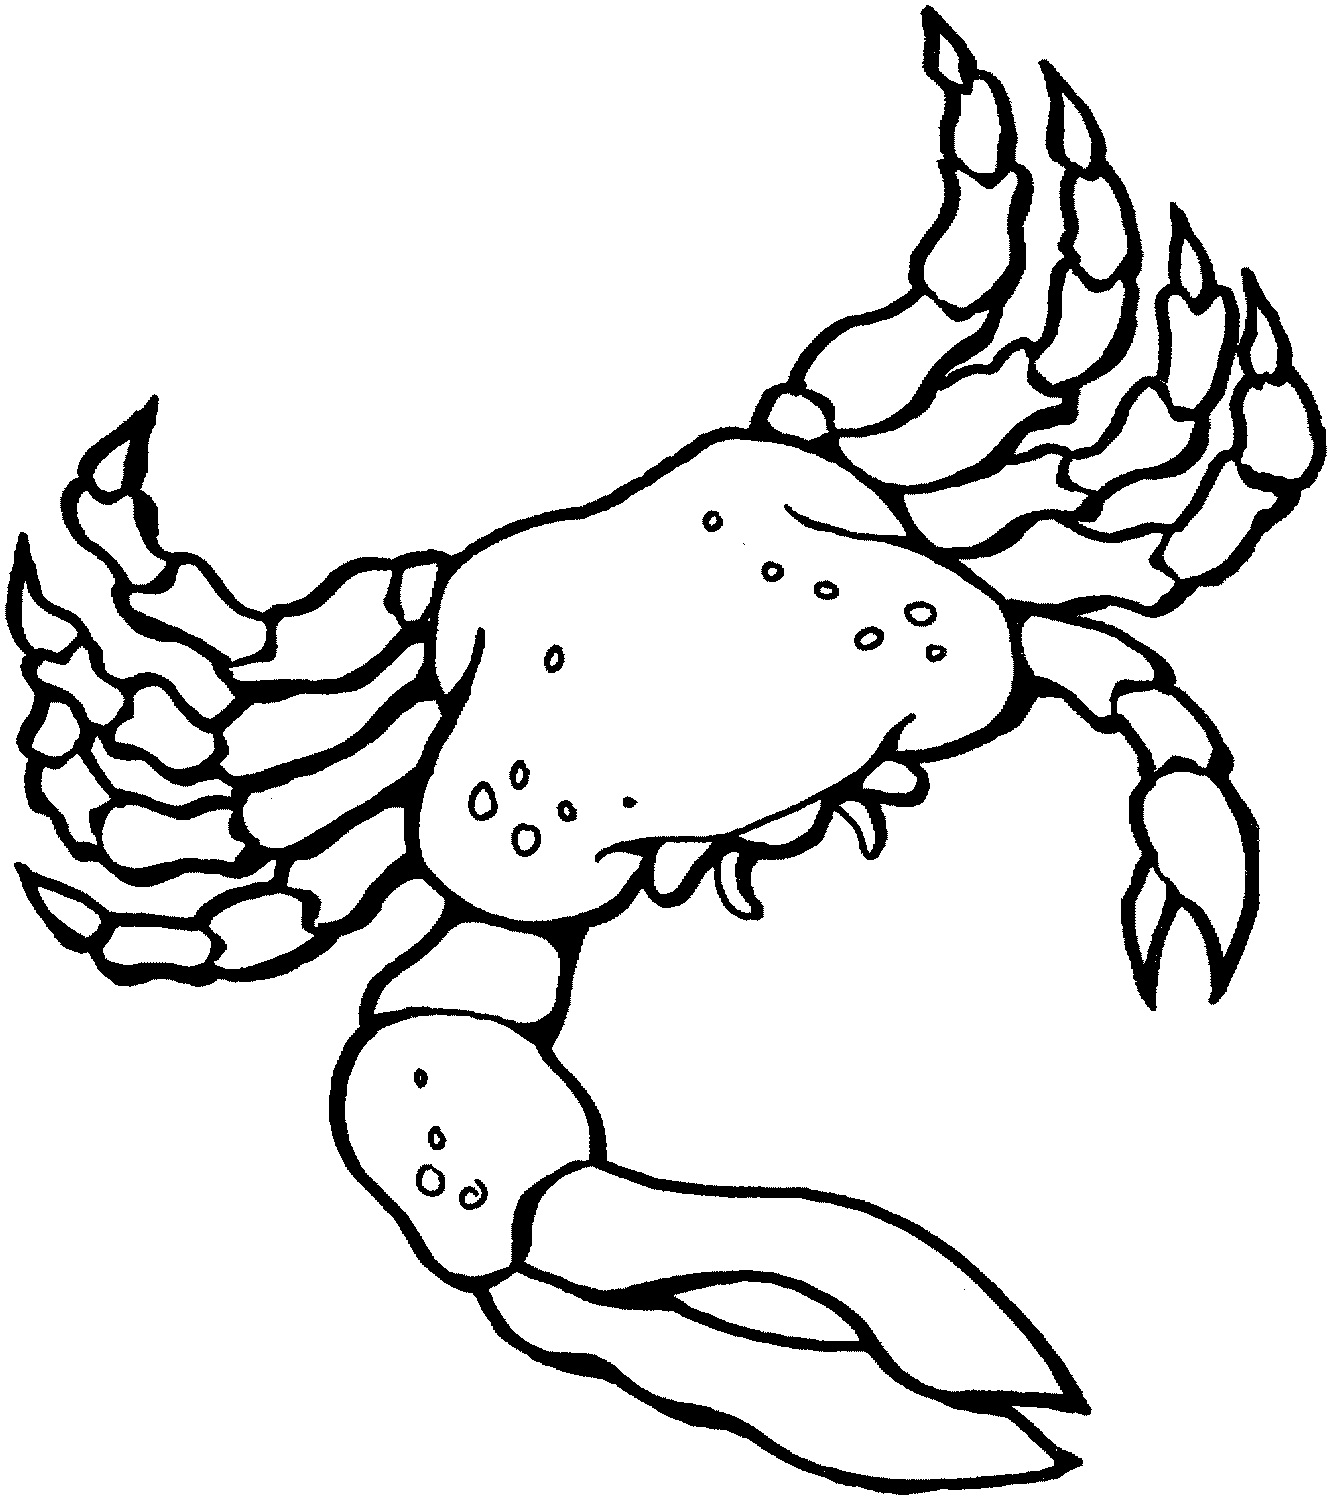 Free Printable Crab Coloring Pages For Kids - Animal Place